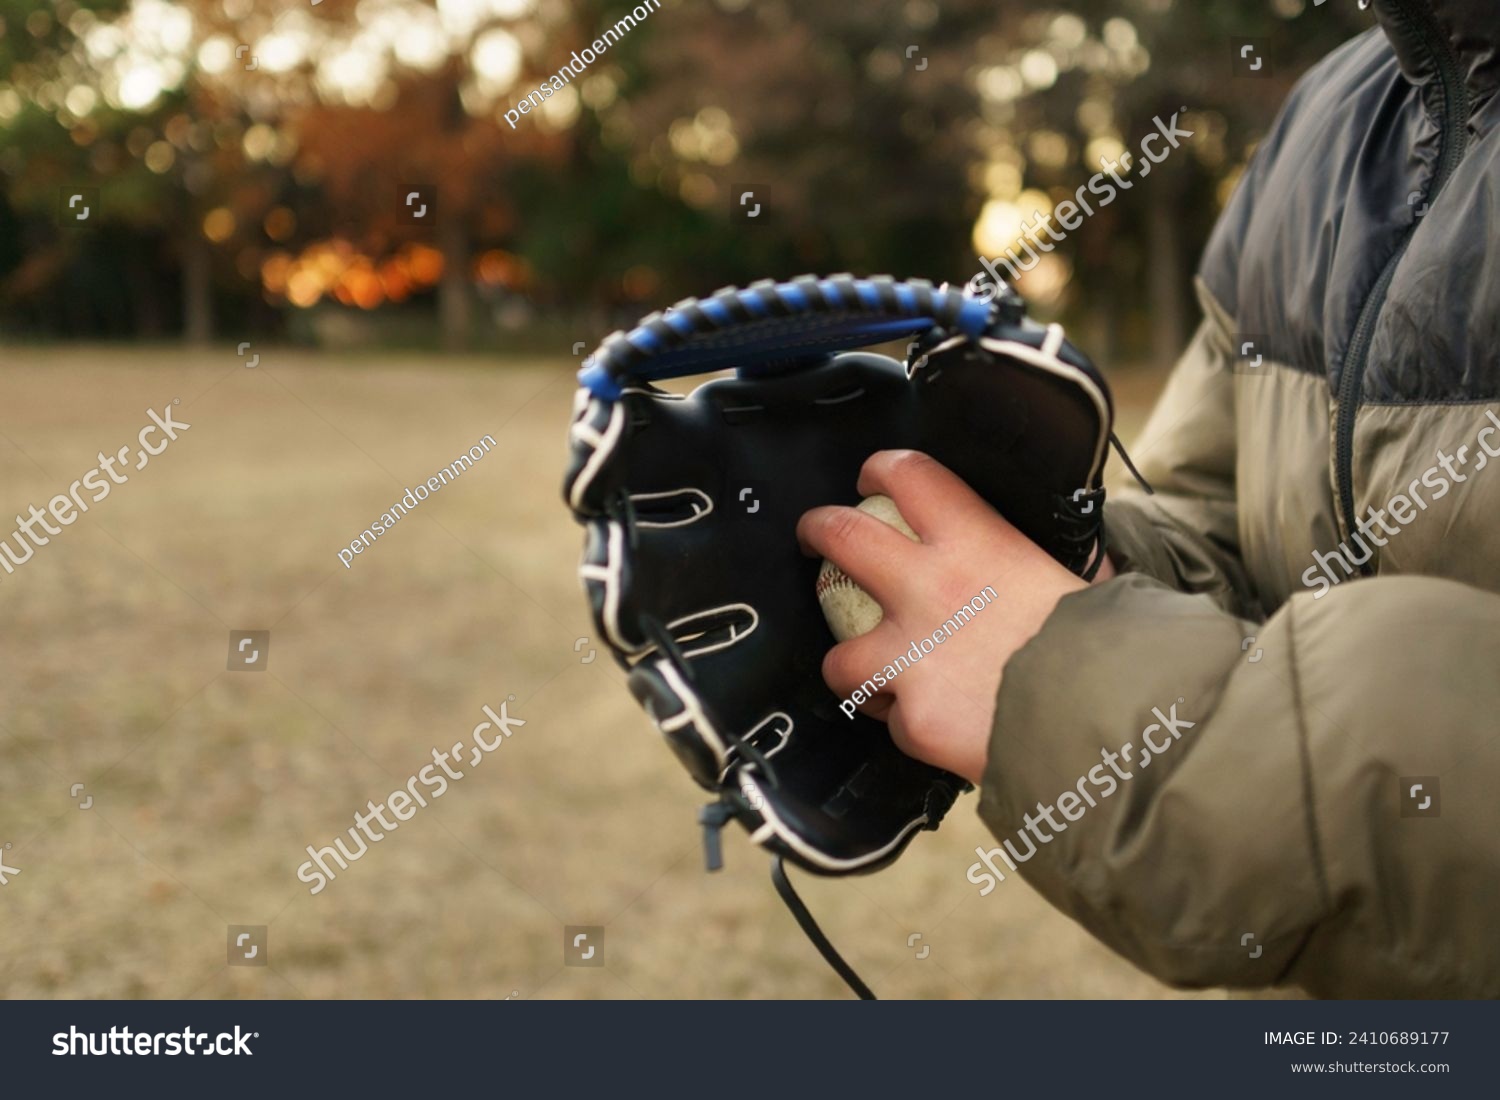 A boy holding a ball, before throwing it. Baseball glove. Left handed. Grass Baseball, vacation, sports, practice, park, afternoon.  Fall or Winter, beginner pitcher. #2410689177